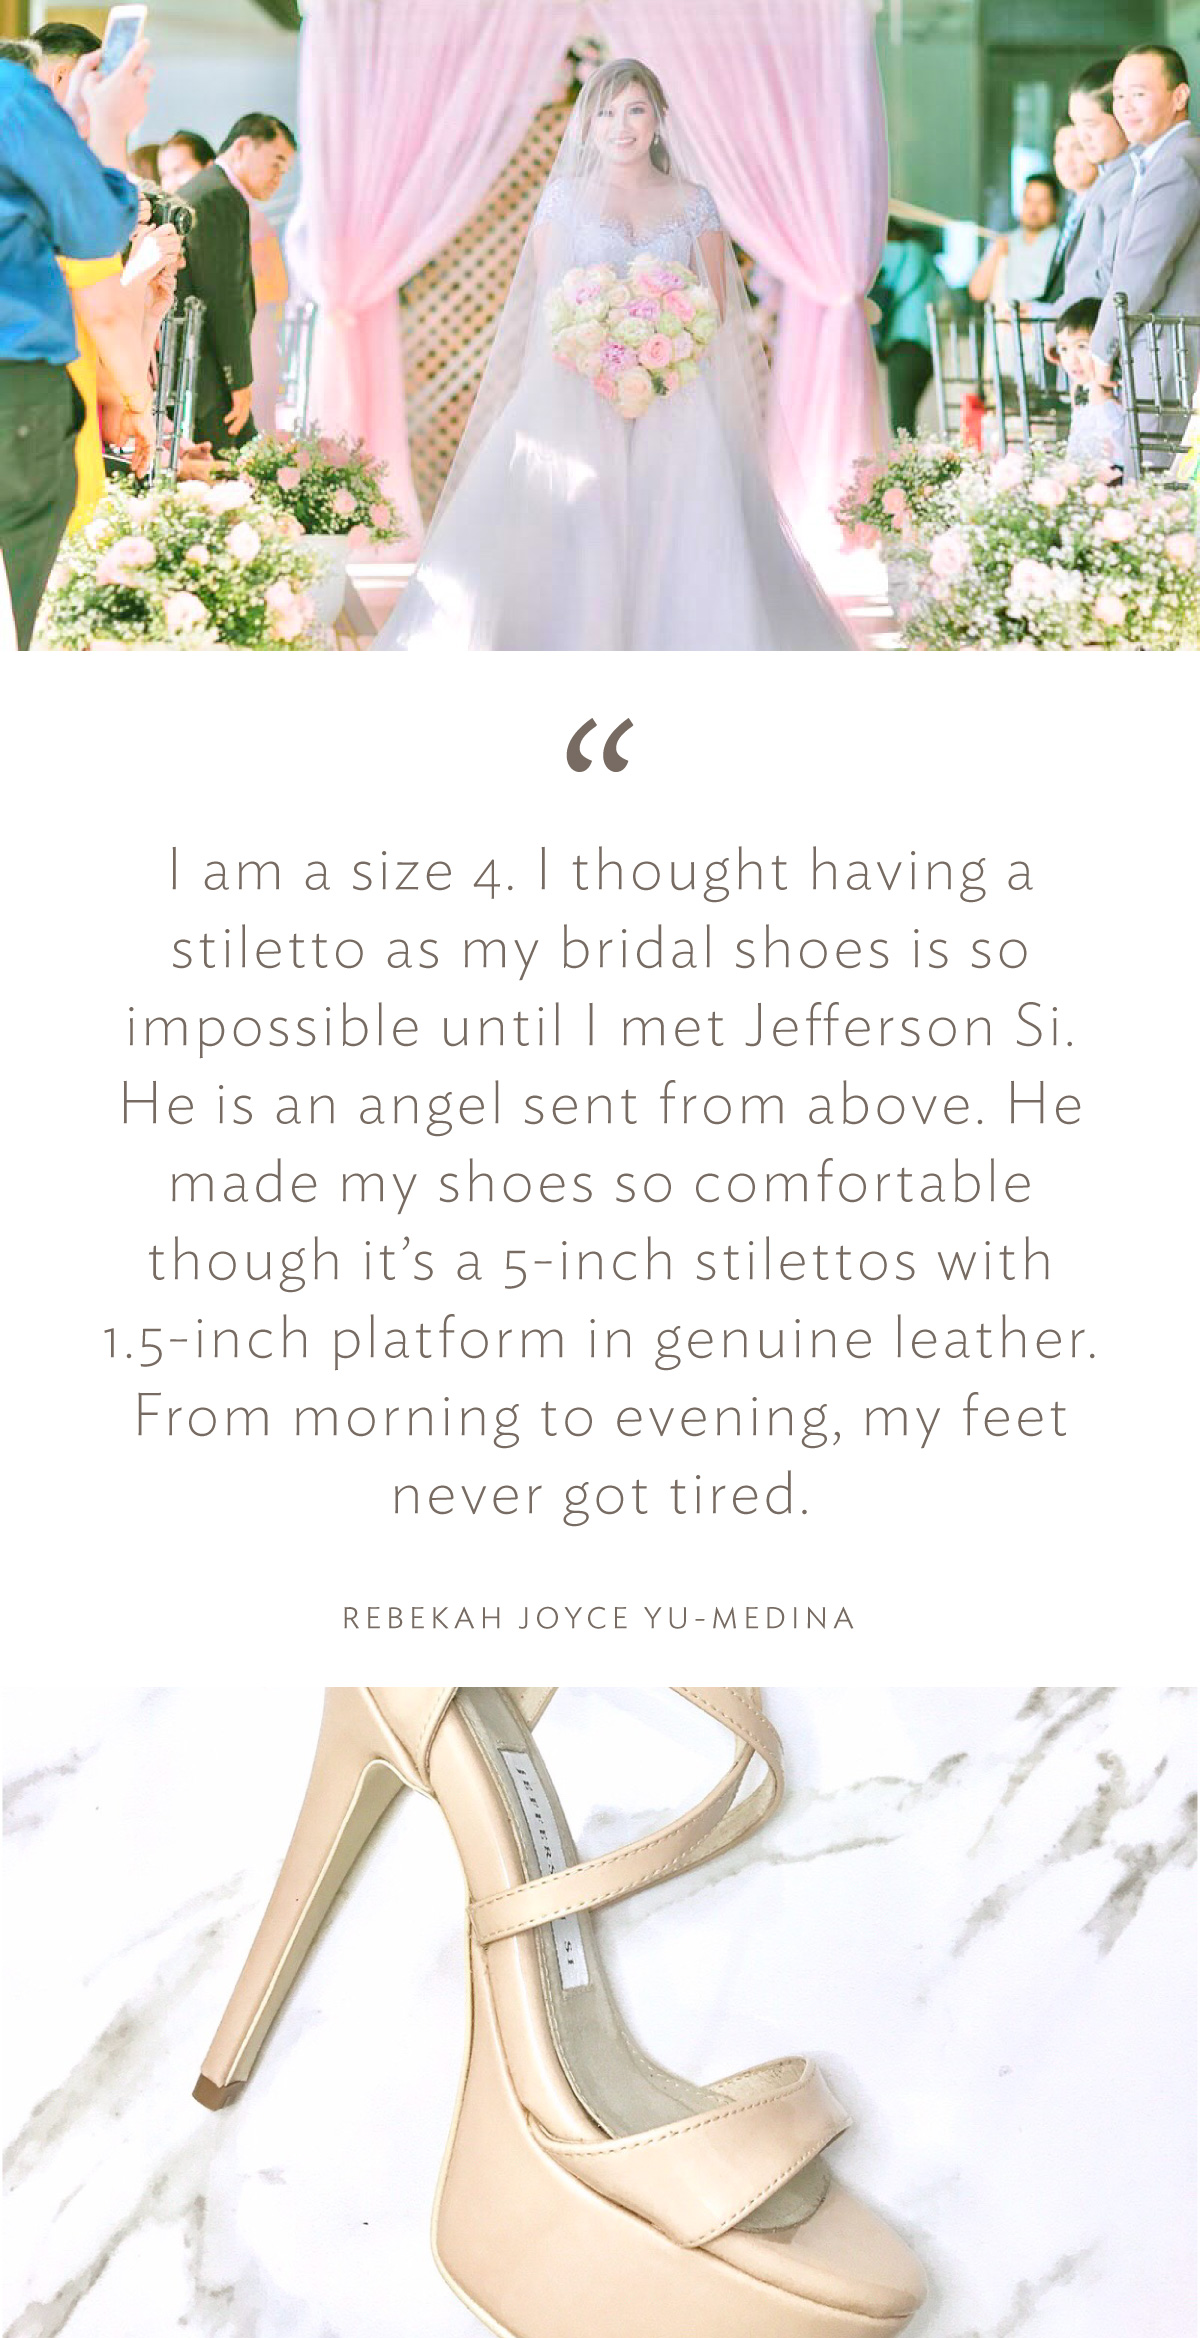 “I am a size 4. I thought having a stiletto as my bridal shoes is so impossible until I met Jefferson Si. He is an angel sent from above. He made my shoes so comfortable though it’s a 5-inch stilettos with 1.5-inch platform in genuine leather. From morning to evening, my feet never got tired.” (Rebekah Joyce Yu-Medina)